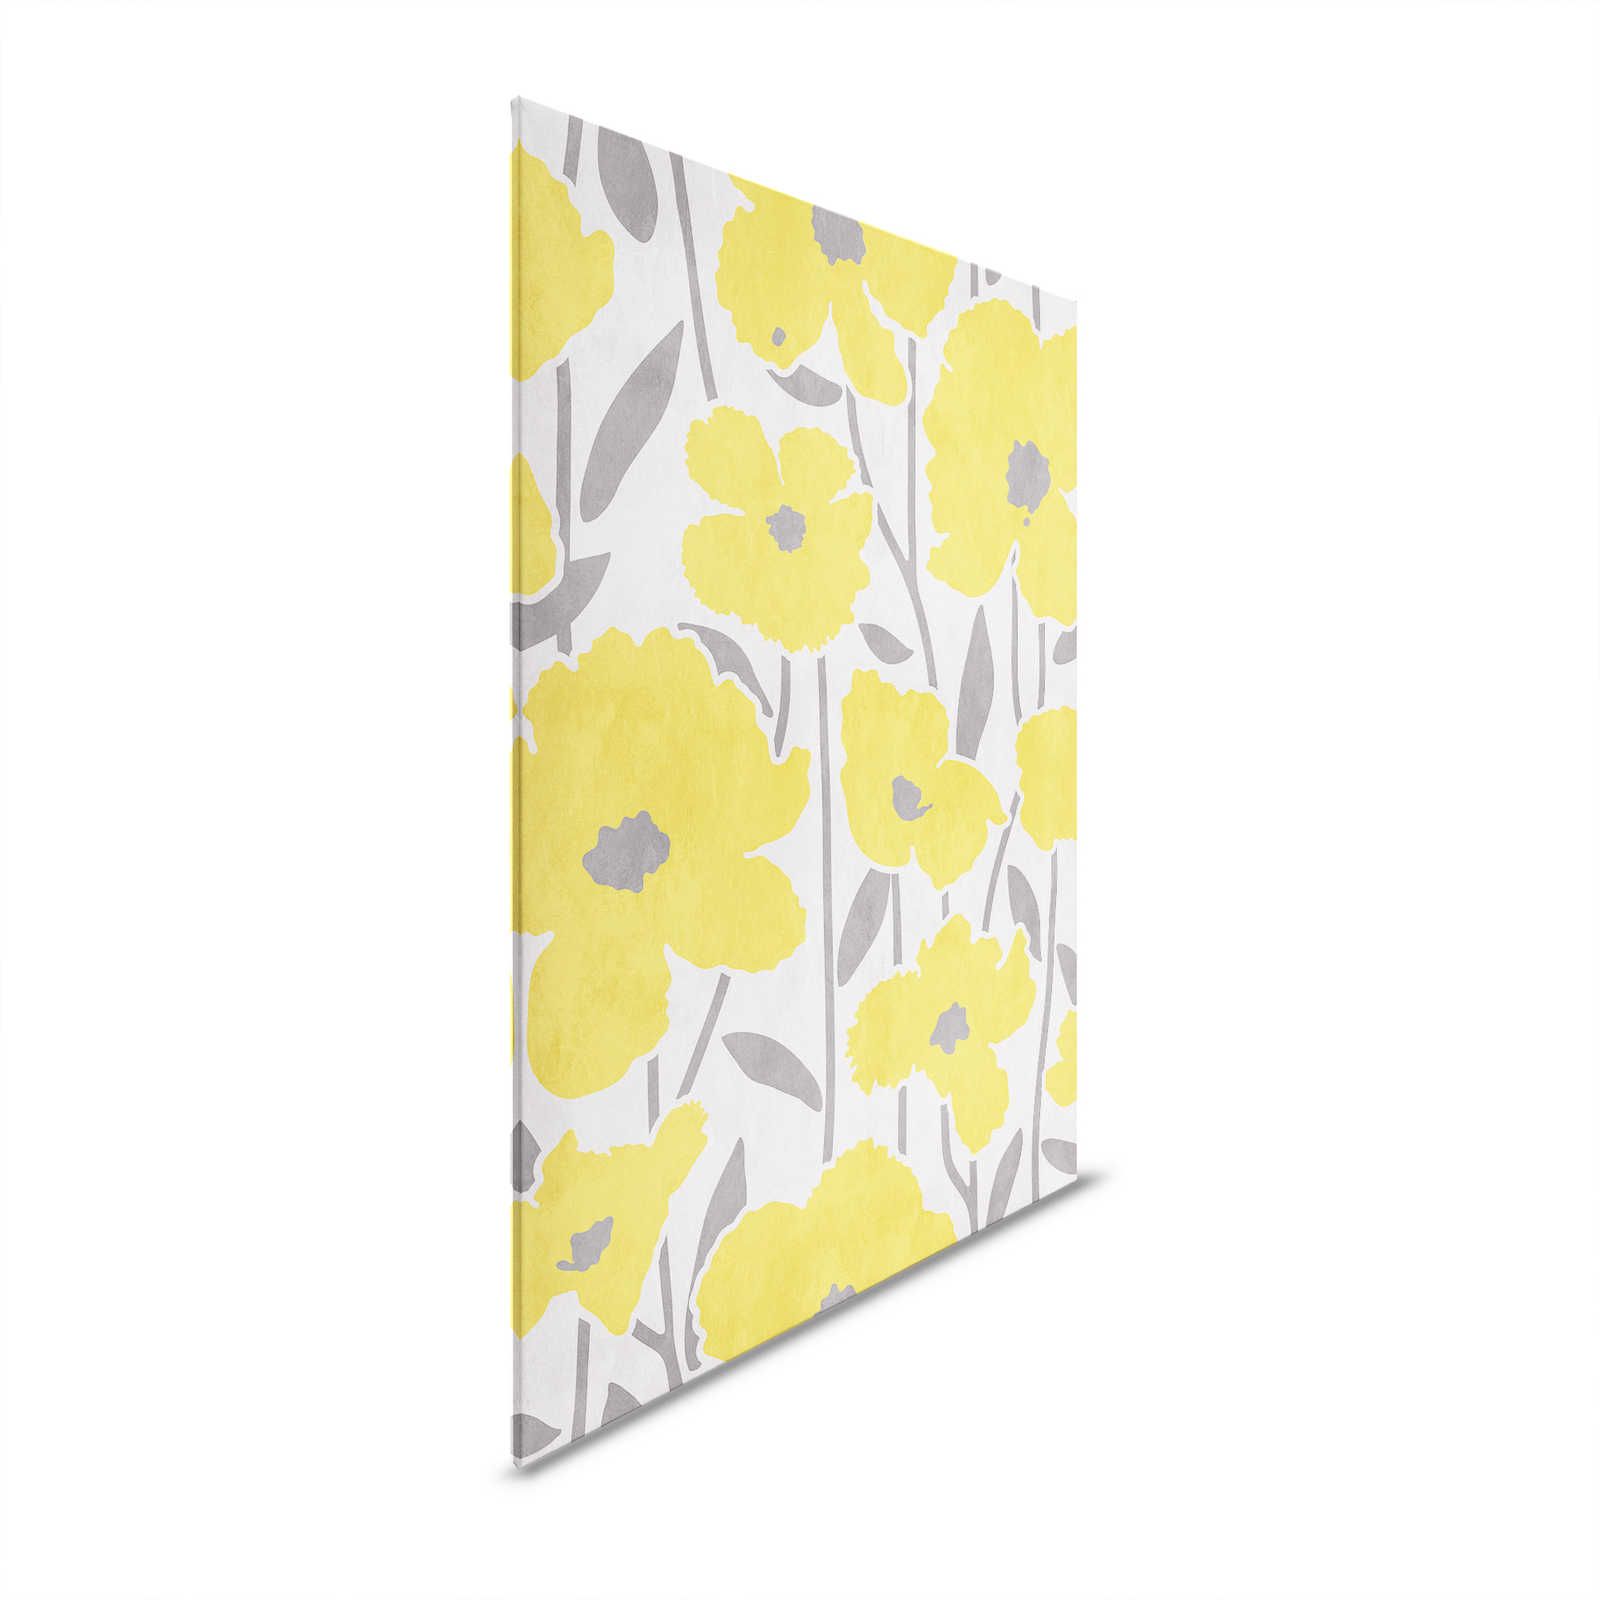 Flower Market 4 - Floral Canvas Painting Yellow & Grey with Rendered Effect - 0.80 m x 1.20 m
